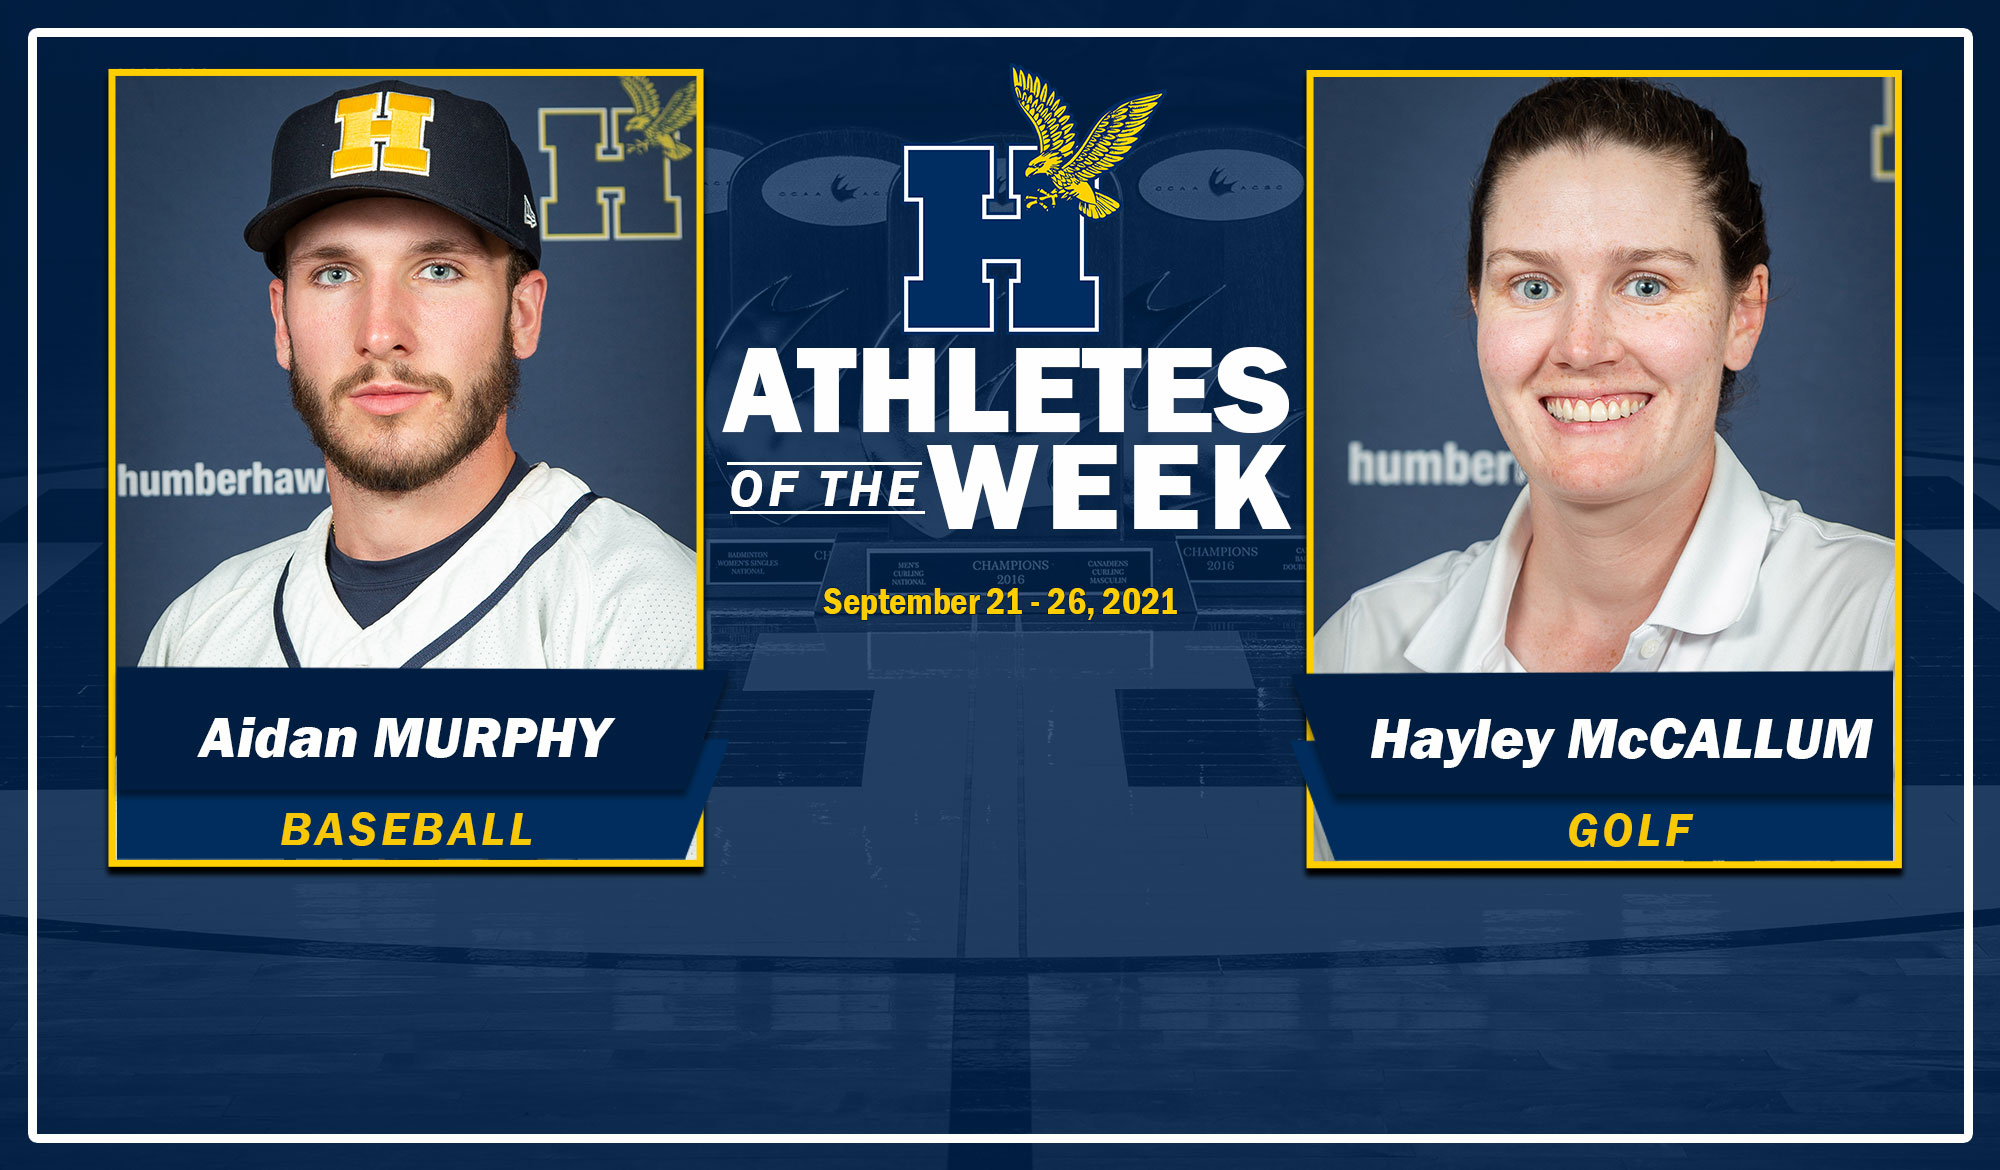 Murphy and McCallum headshots for athletes of the week